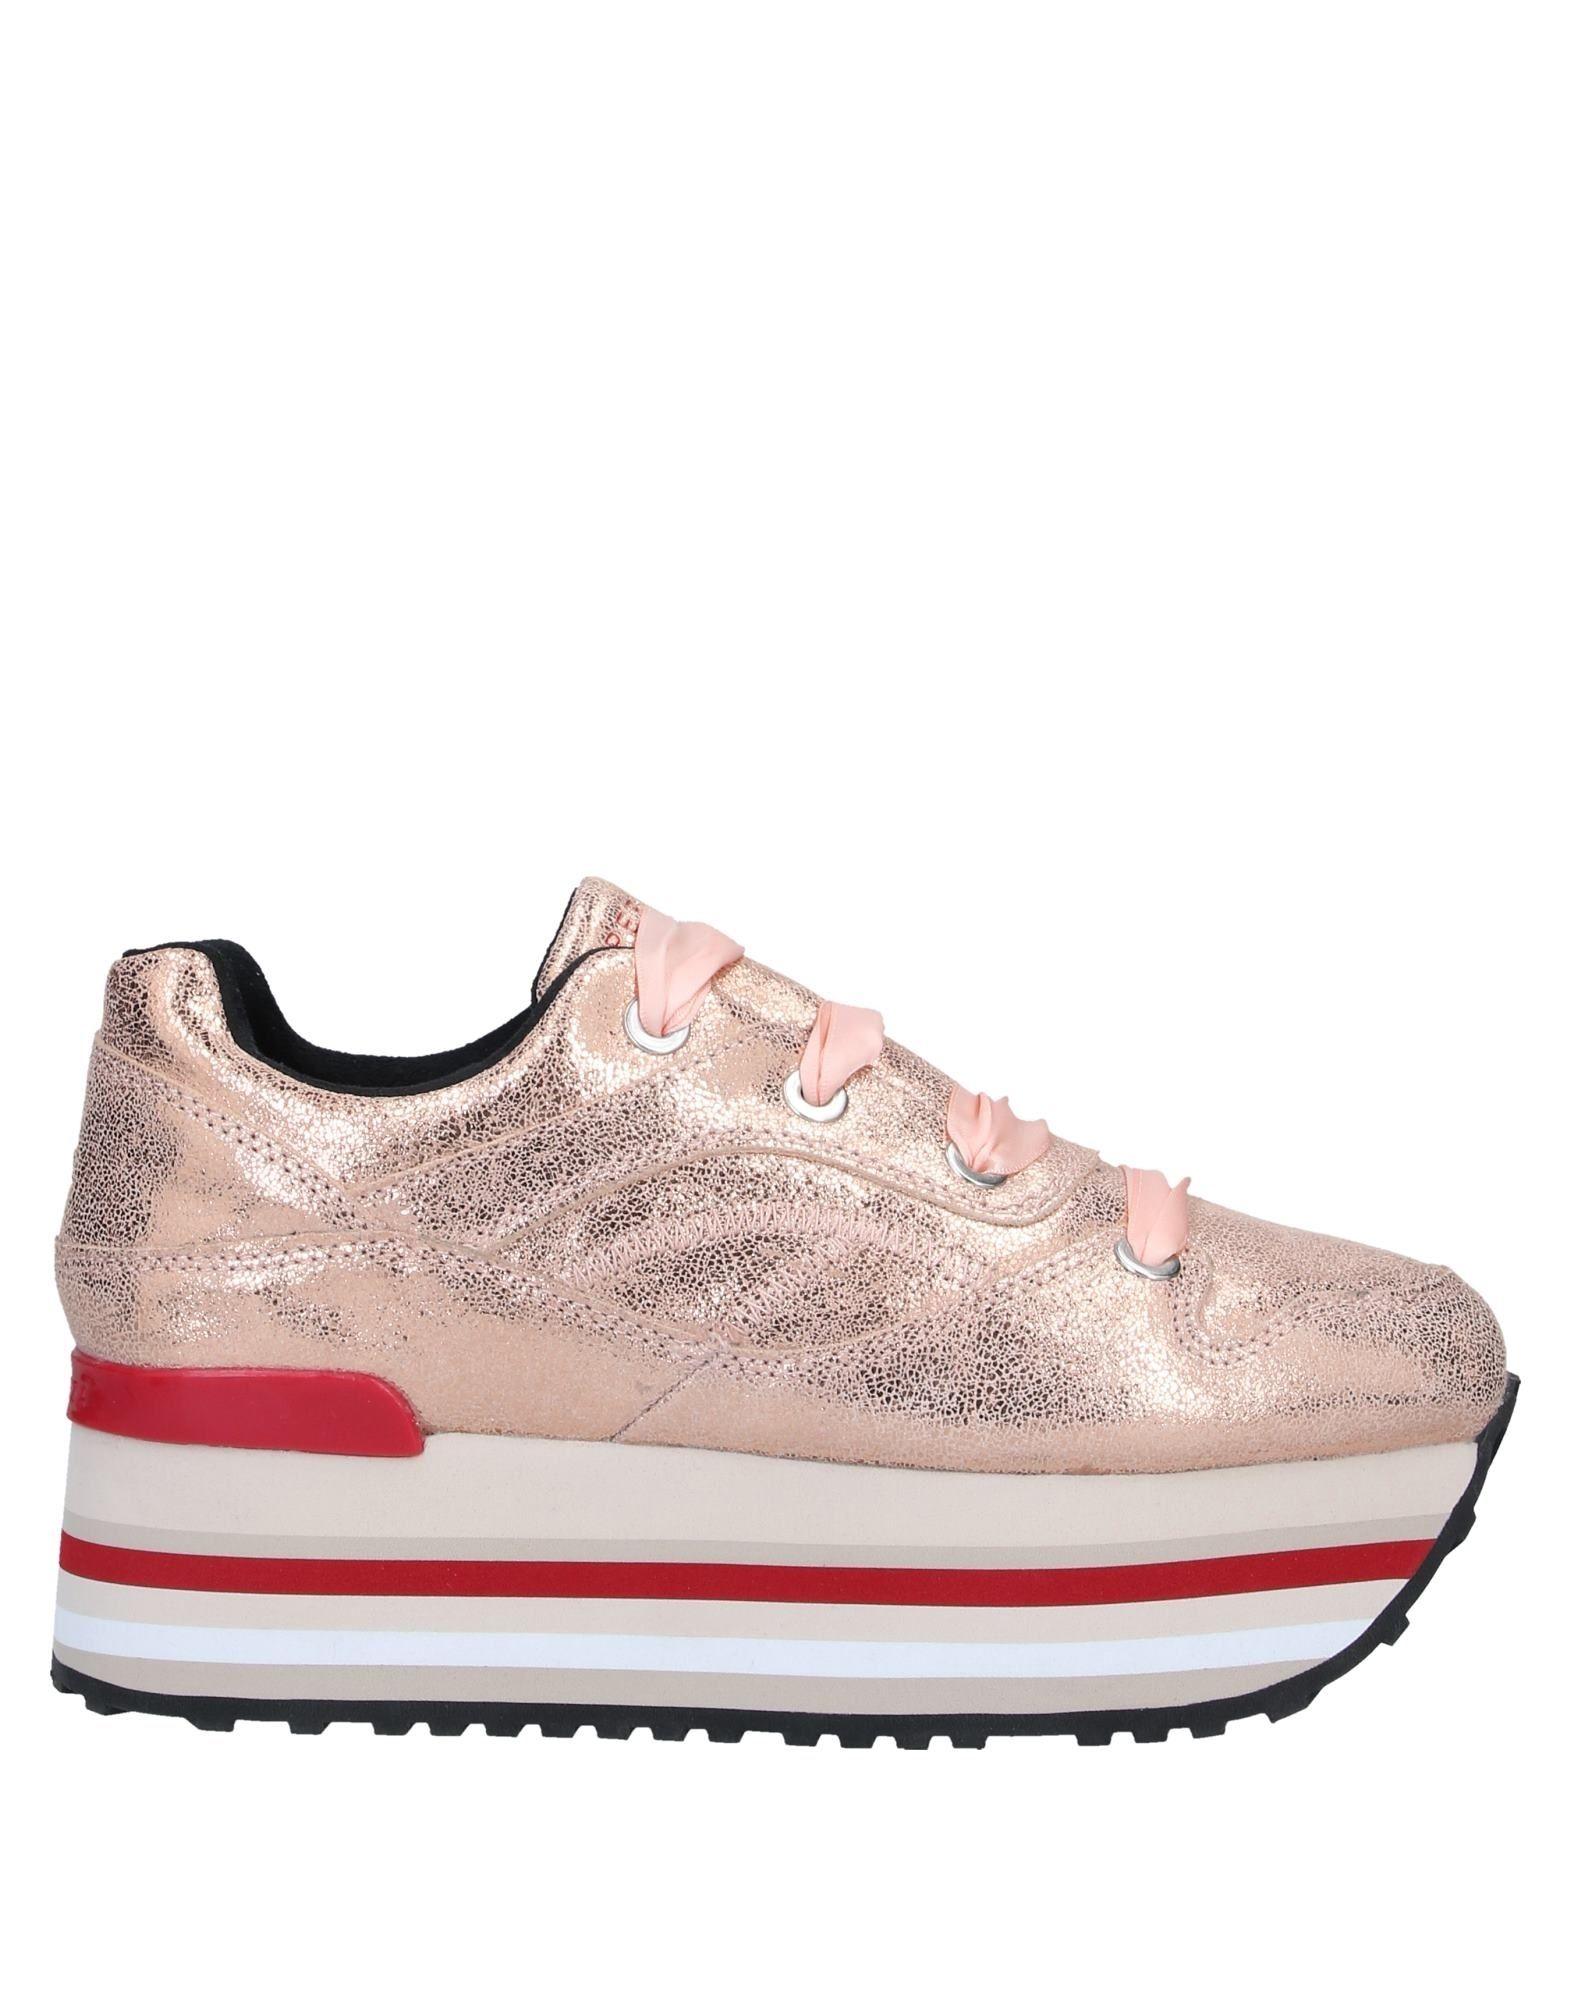 Apepazza Leather Low-tops & Sneakers in Pink - Lyst